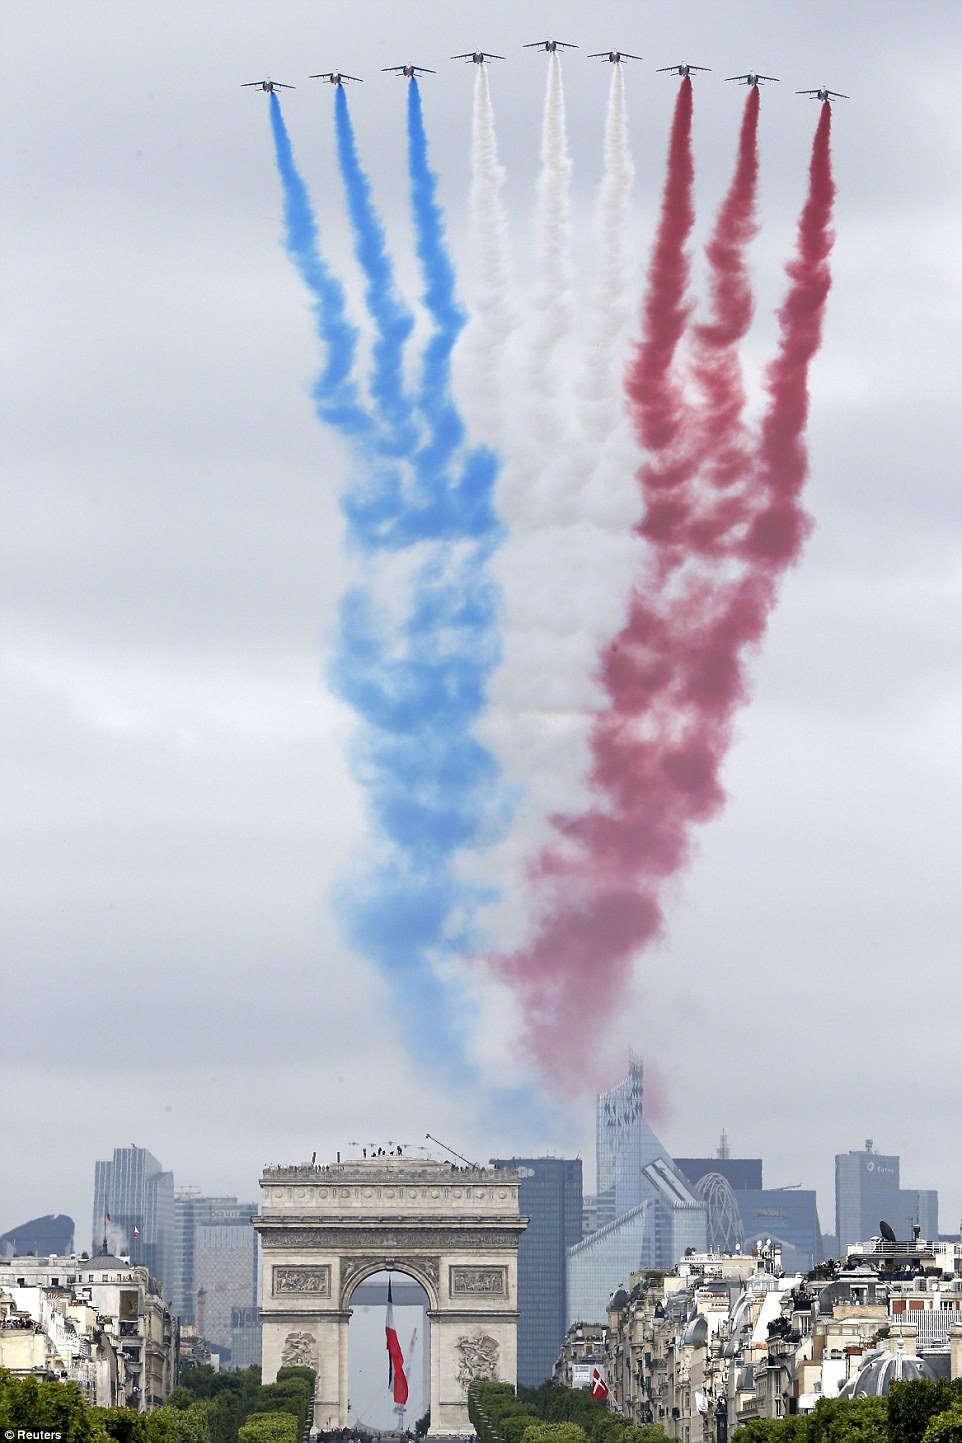 Nine jets form the French Air Force scream over the Arc de Triomphe as part of the celebrations for Bastille Day releasing smoke in the colours of the French flag